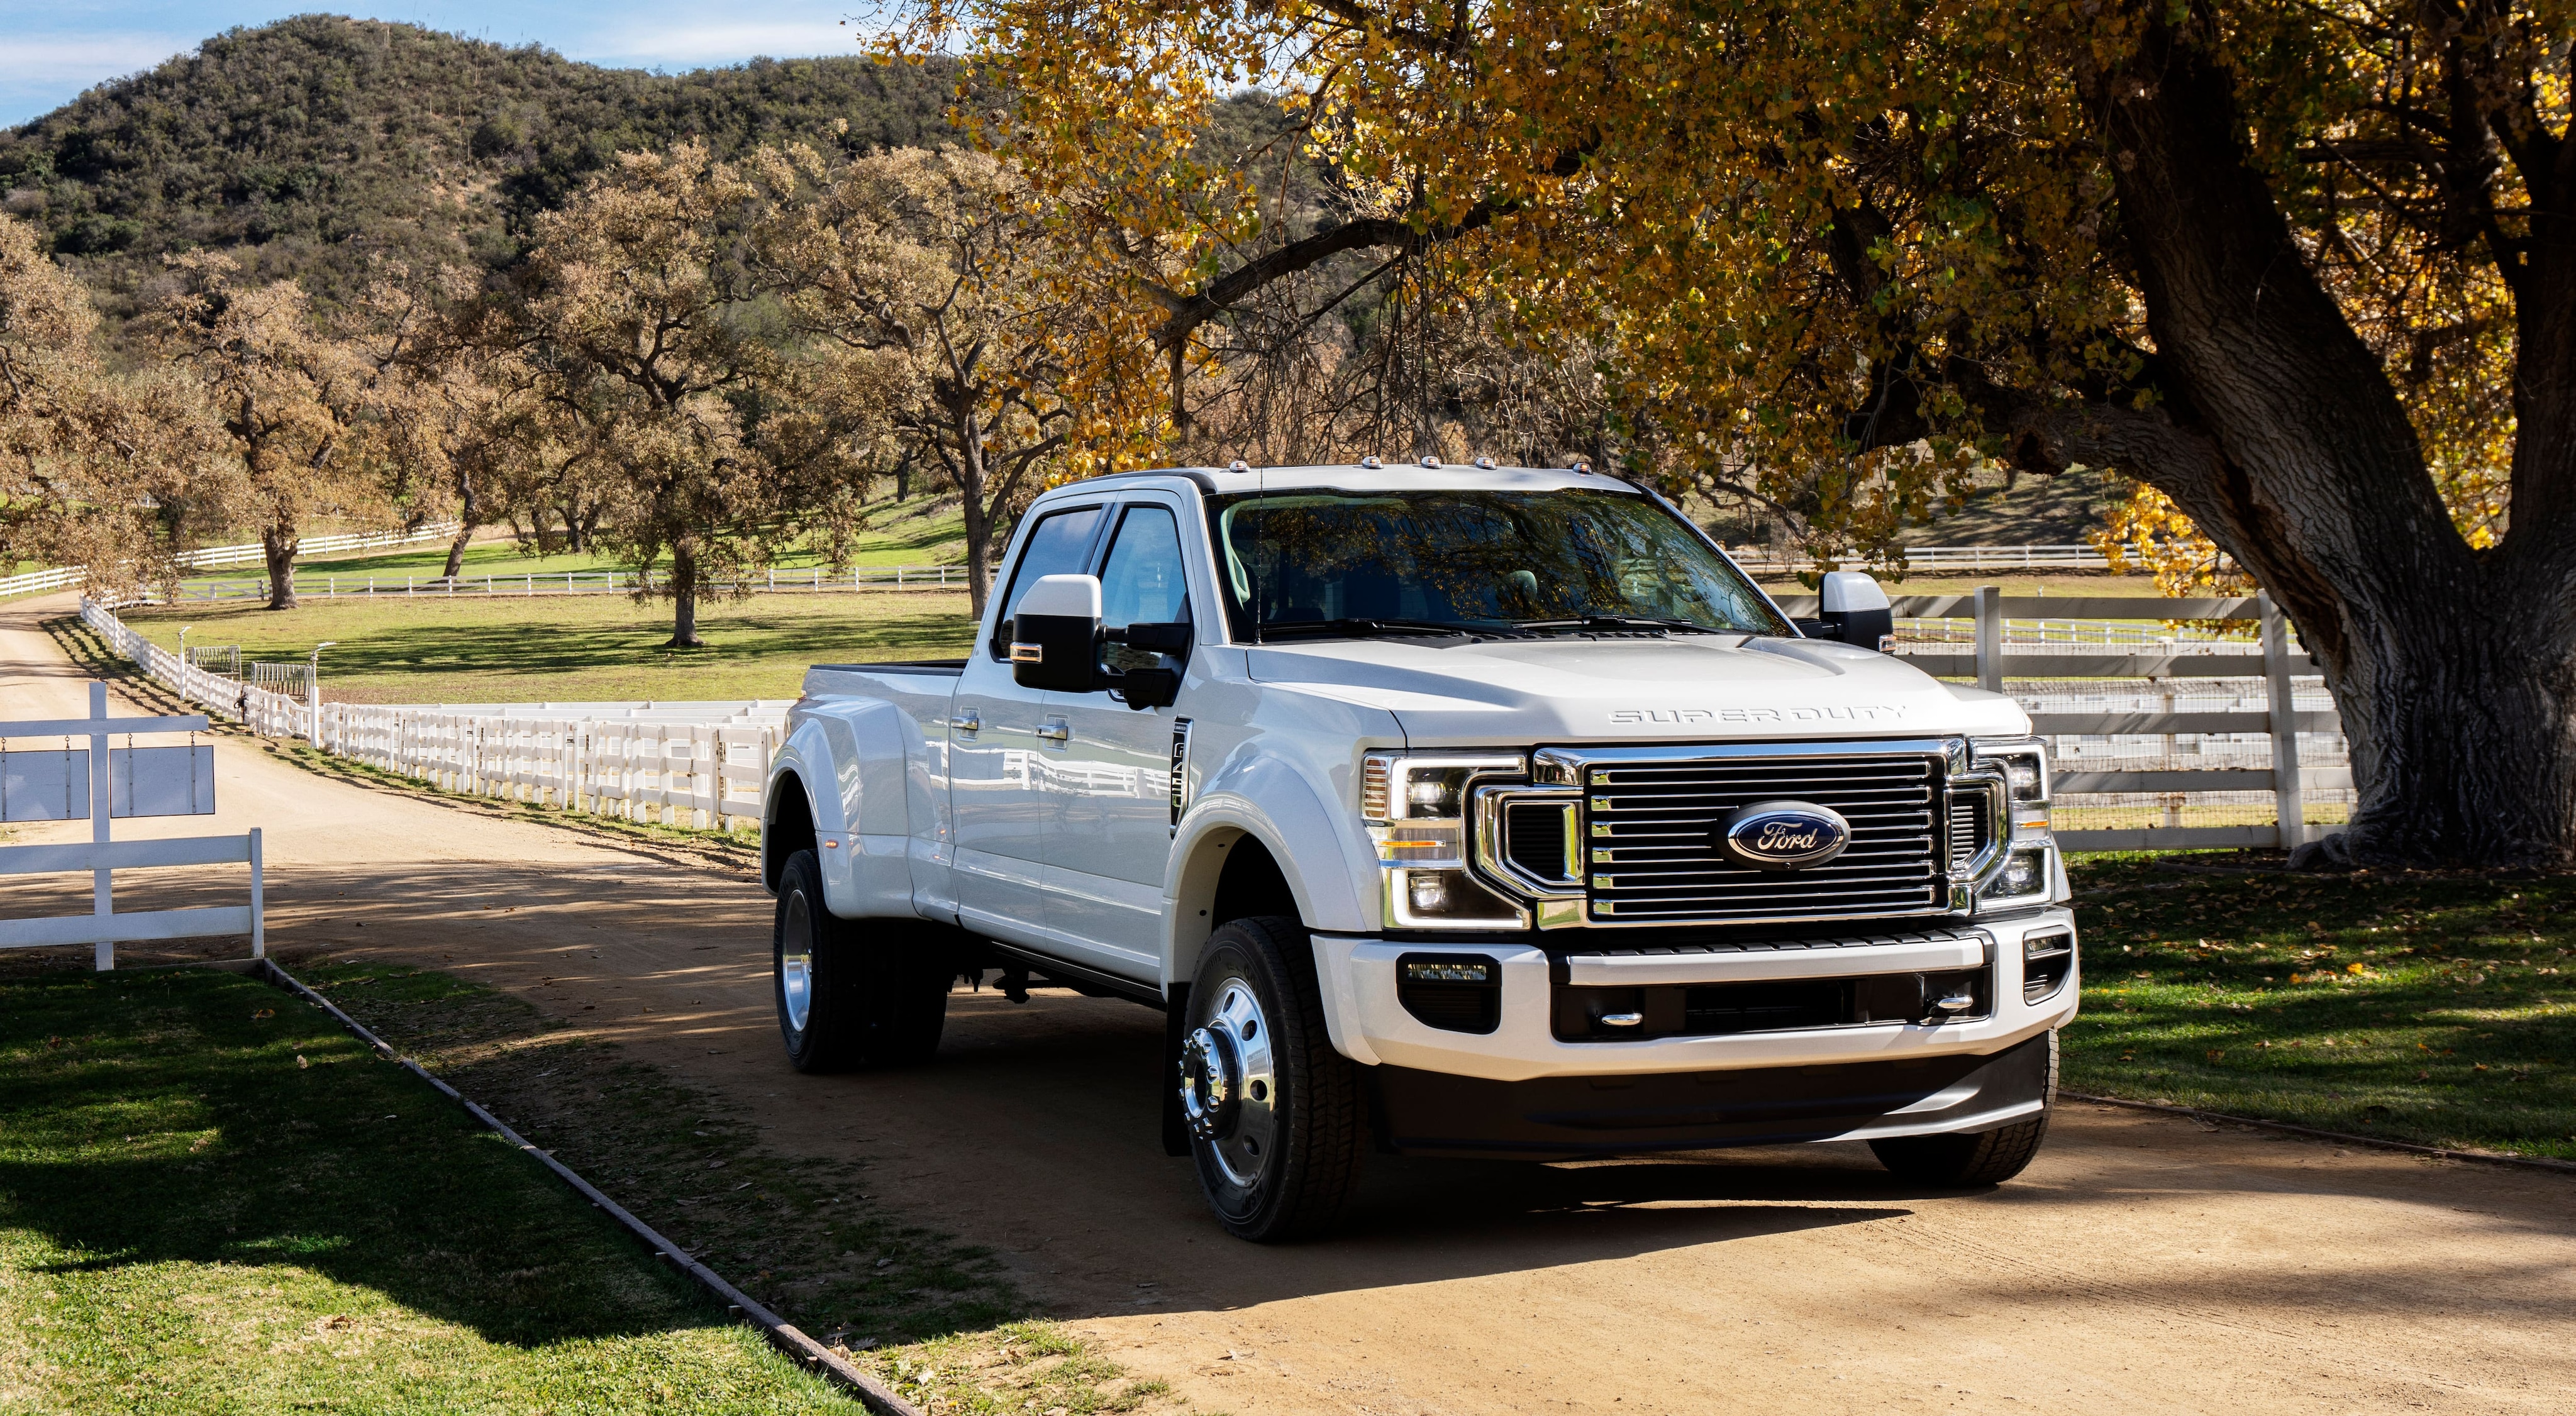 2020 Ford Super Duty Ups the Ante With New Tech & Improved Capability